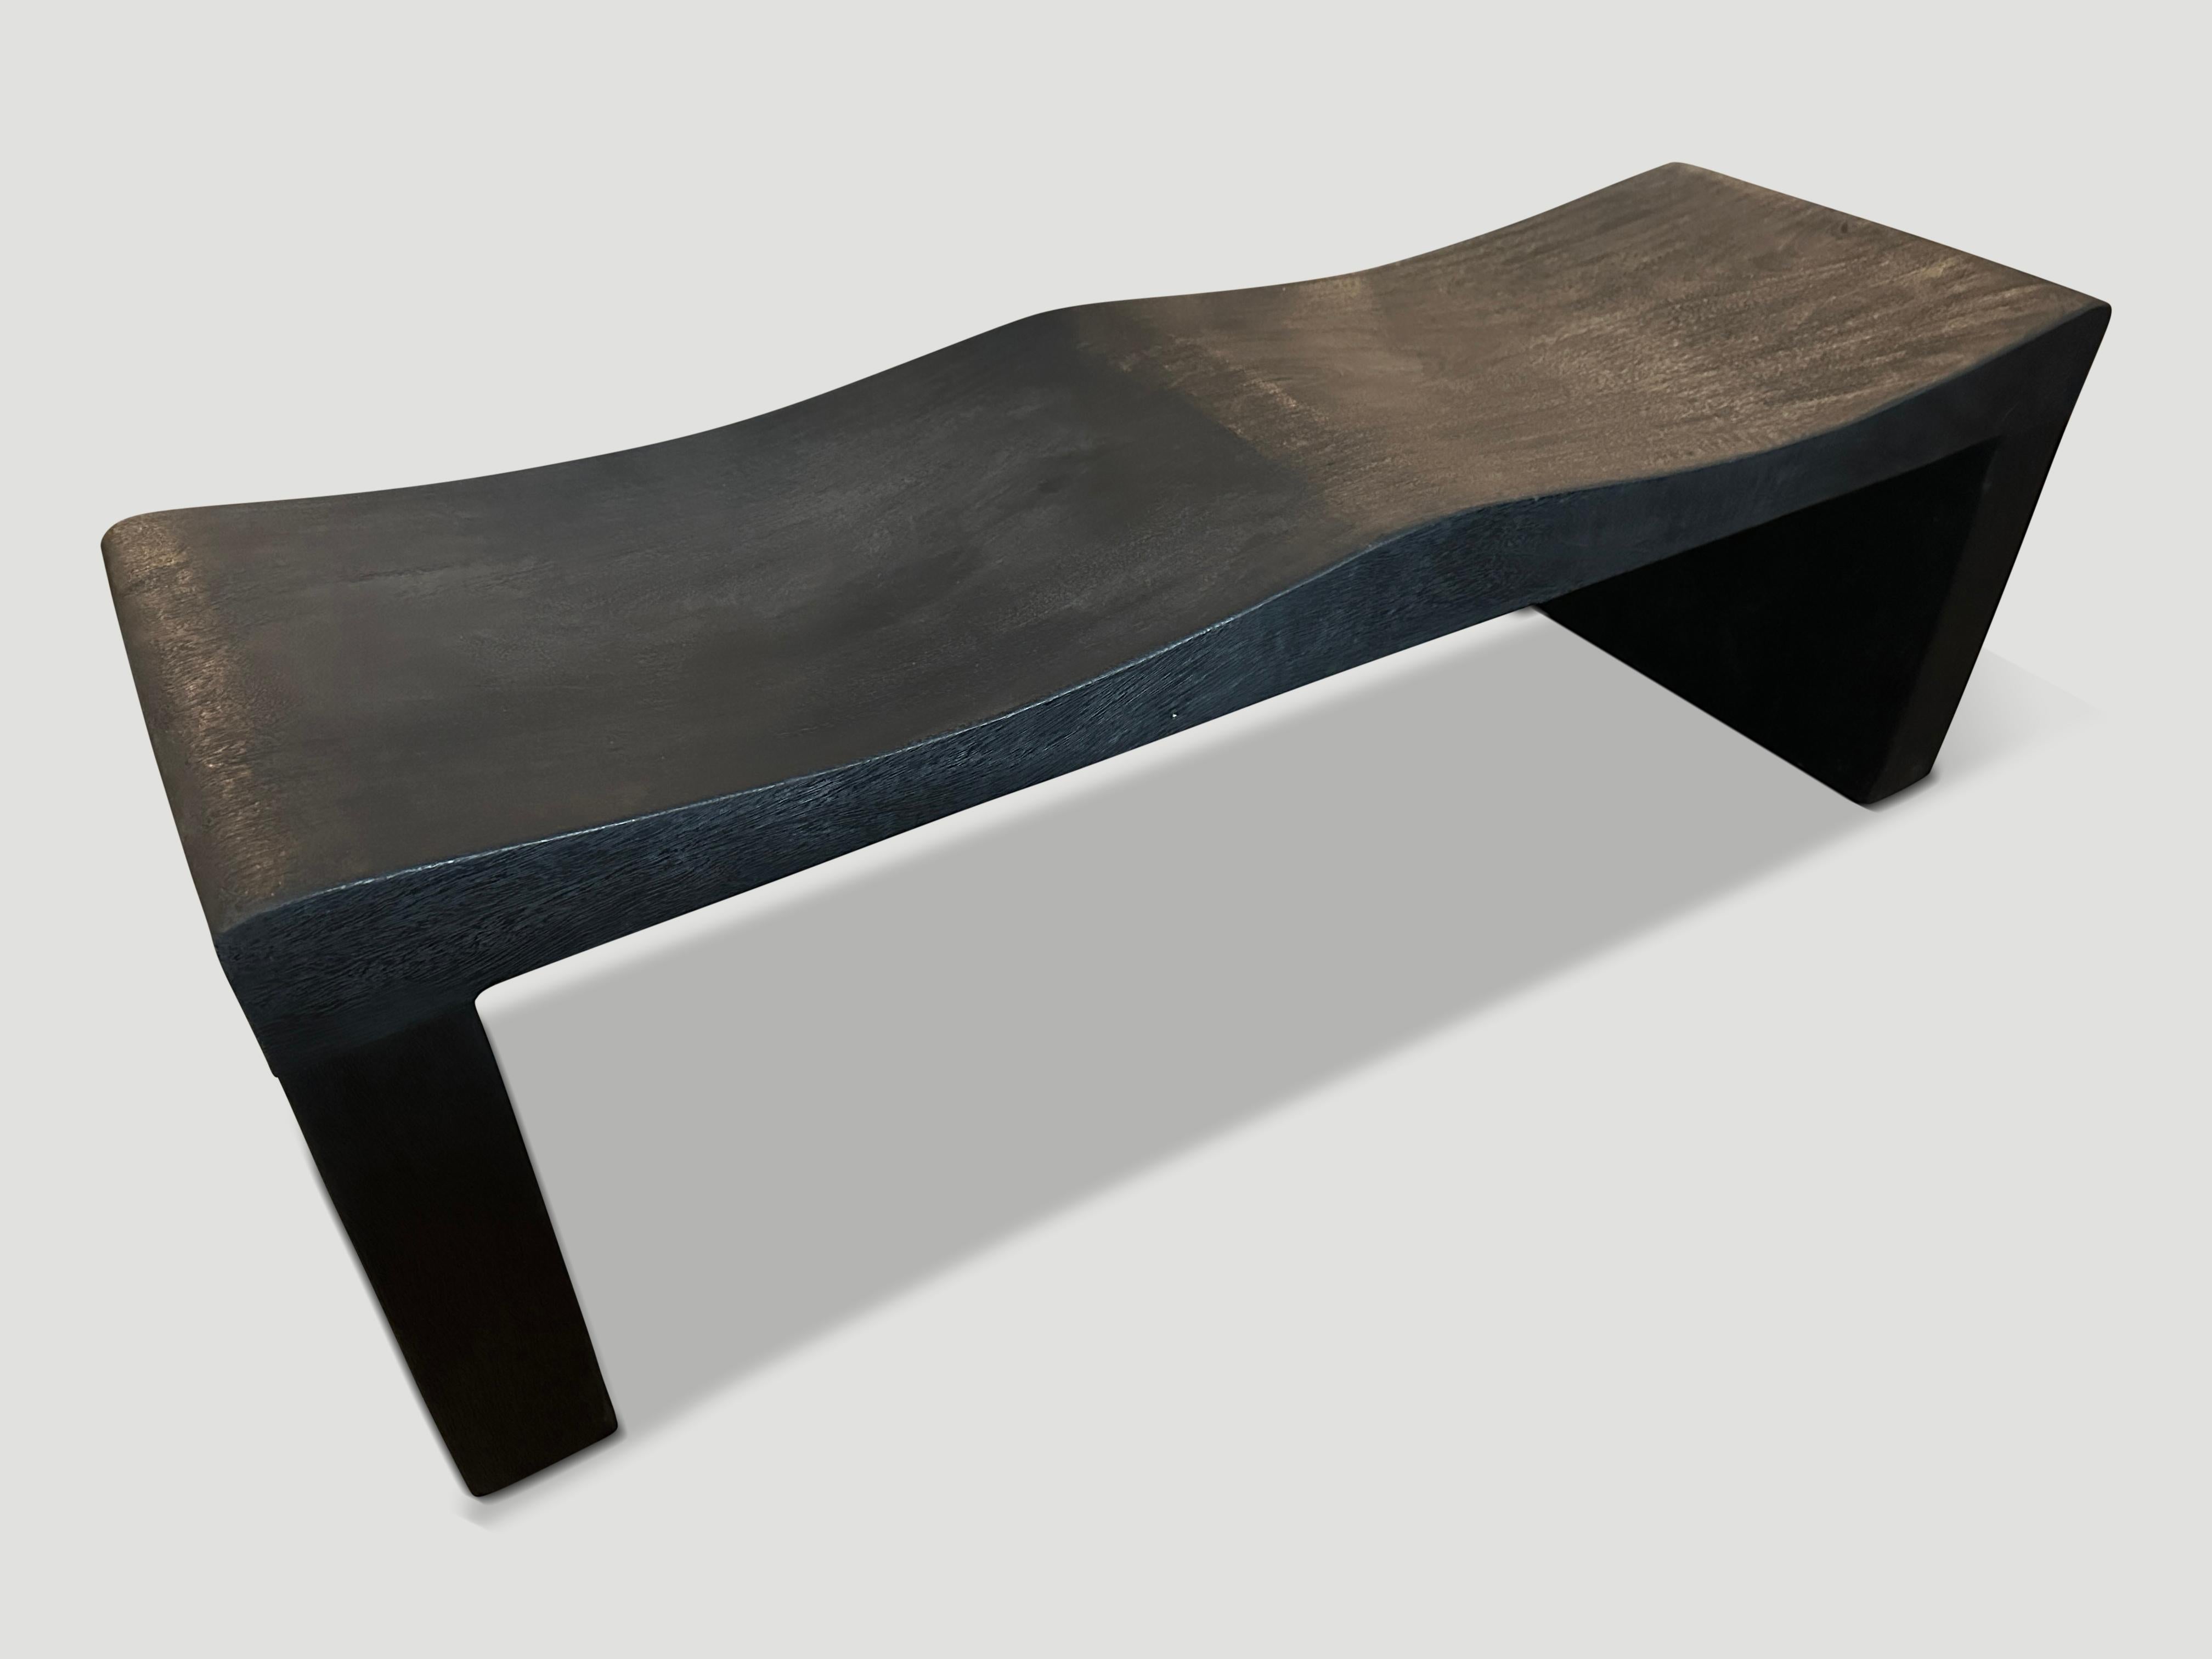 The teak wave bench represents a sleek, modern aesthetic, designed to provide comfort and durability. Solid reclaimed teak wood is hand carved into a wave design. Charred, sanded and sealed revealing the beautiful wood grain. Custom stains and